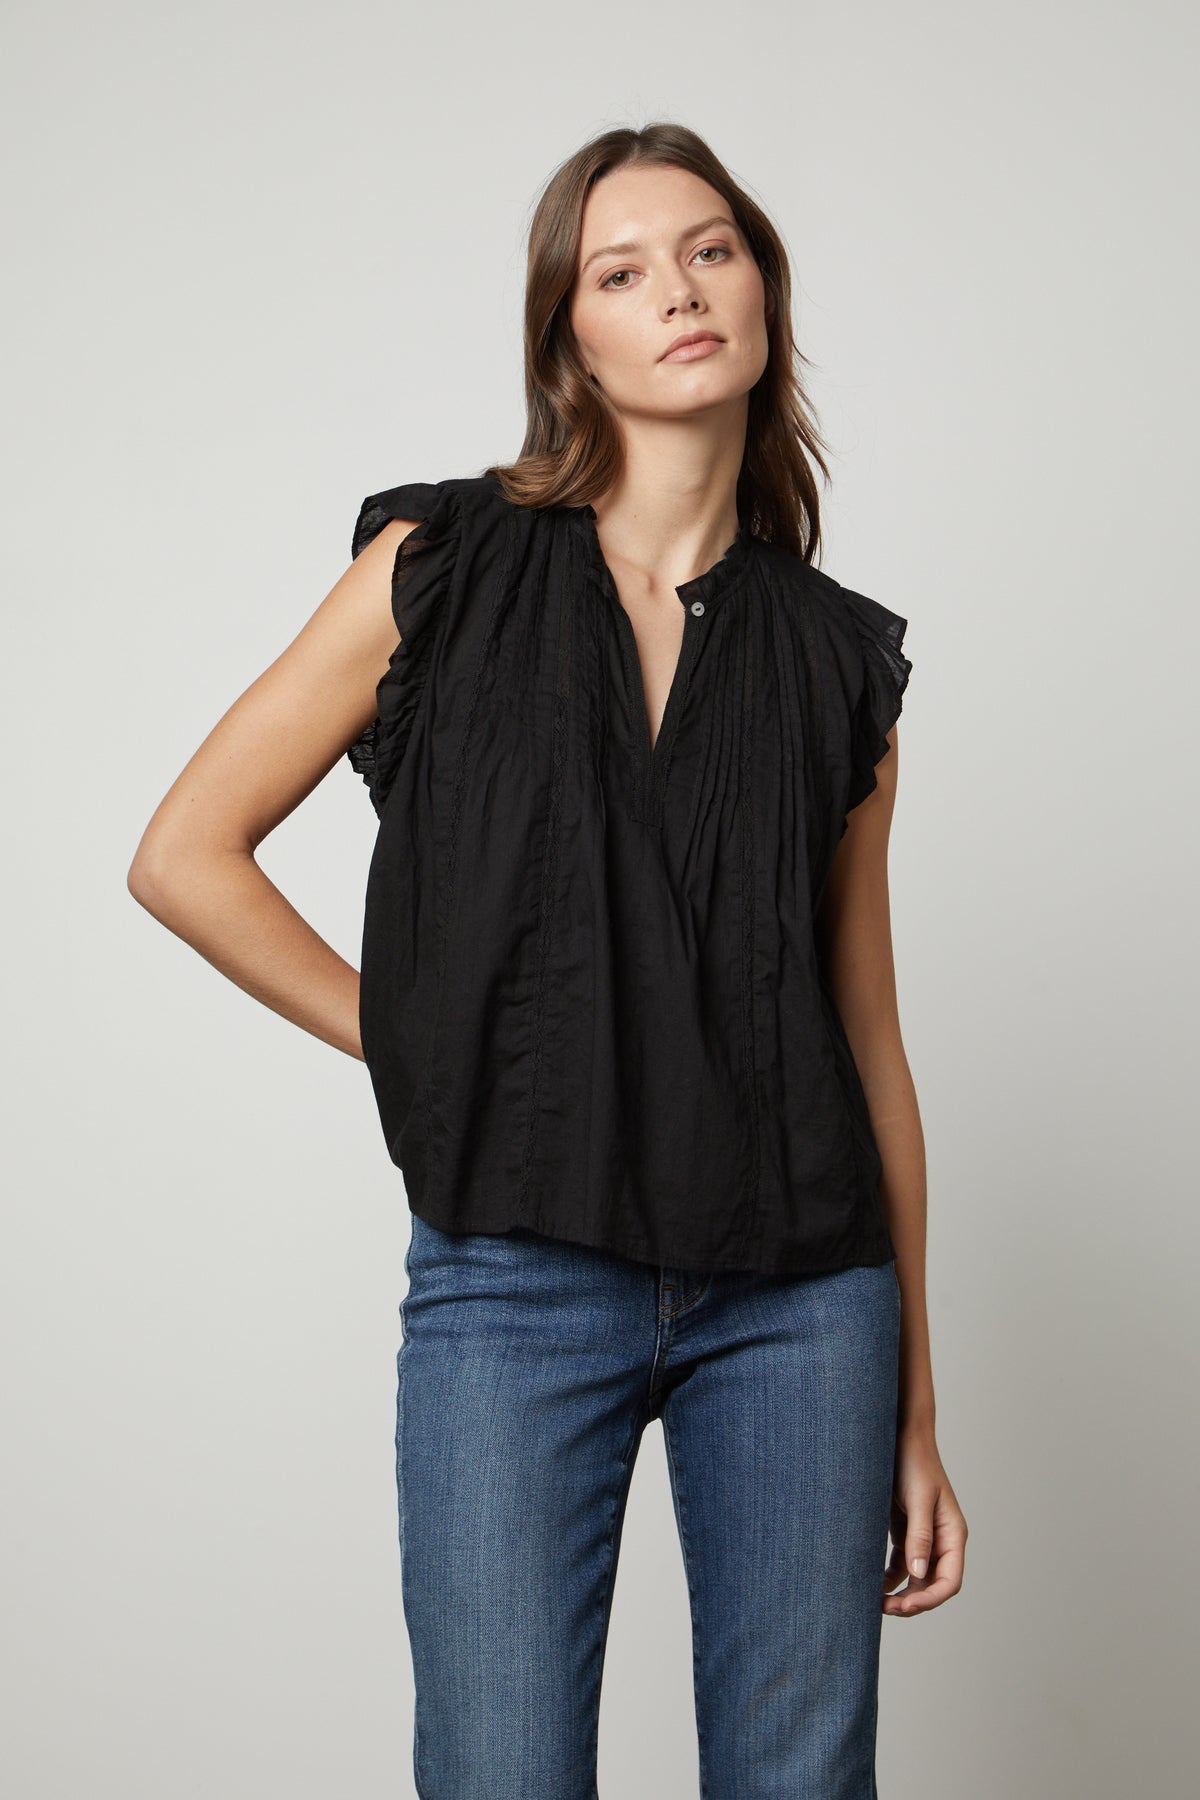   The model is wearing a LIANA LACE TANK TOP from Velvet by Graham & Spencer with ruffled sleeves. 